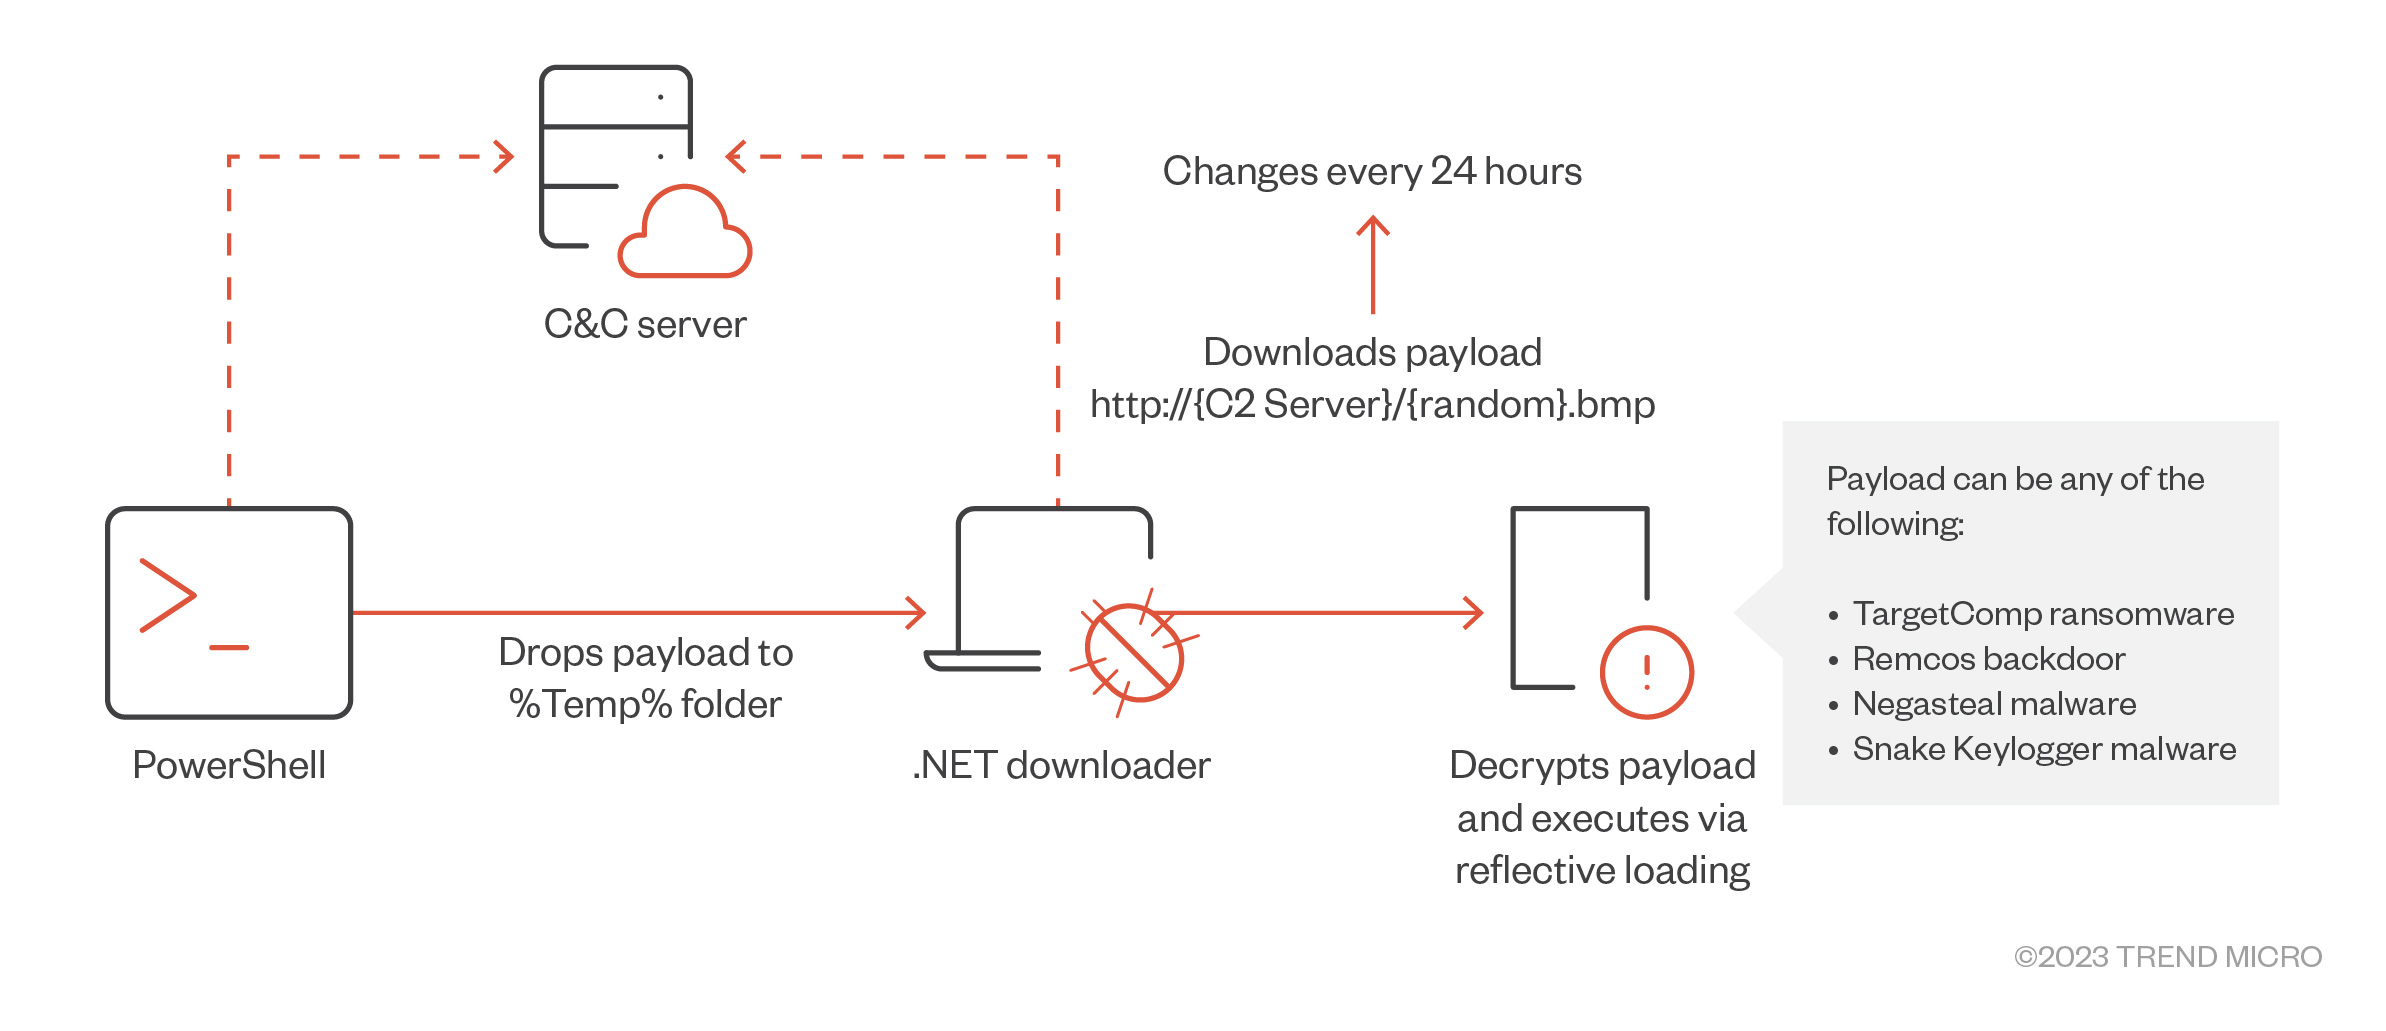 Figure 3. A closer look at the reflective loading technique that TargetCompany threat actors incorporated; the IP address it connects to changes every 24 hours and deploys different payloads